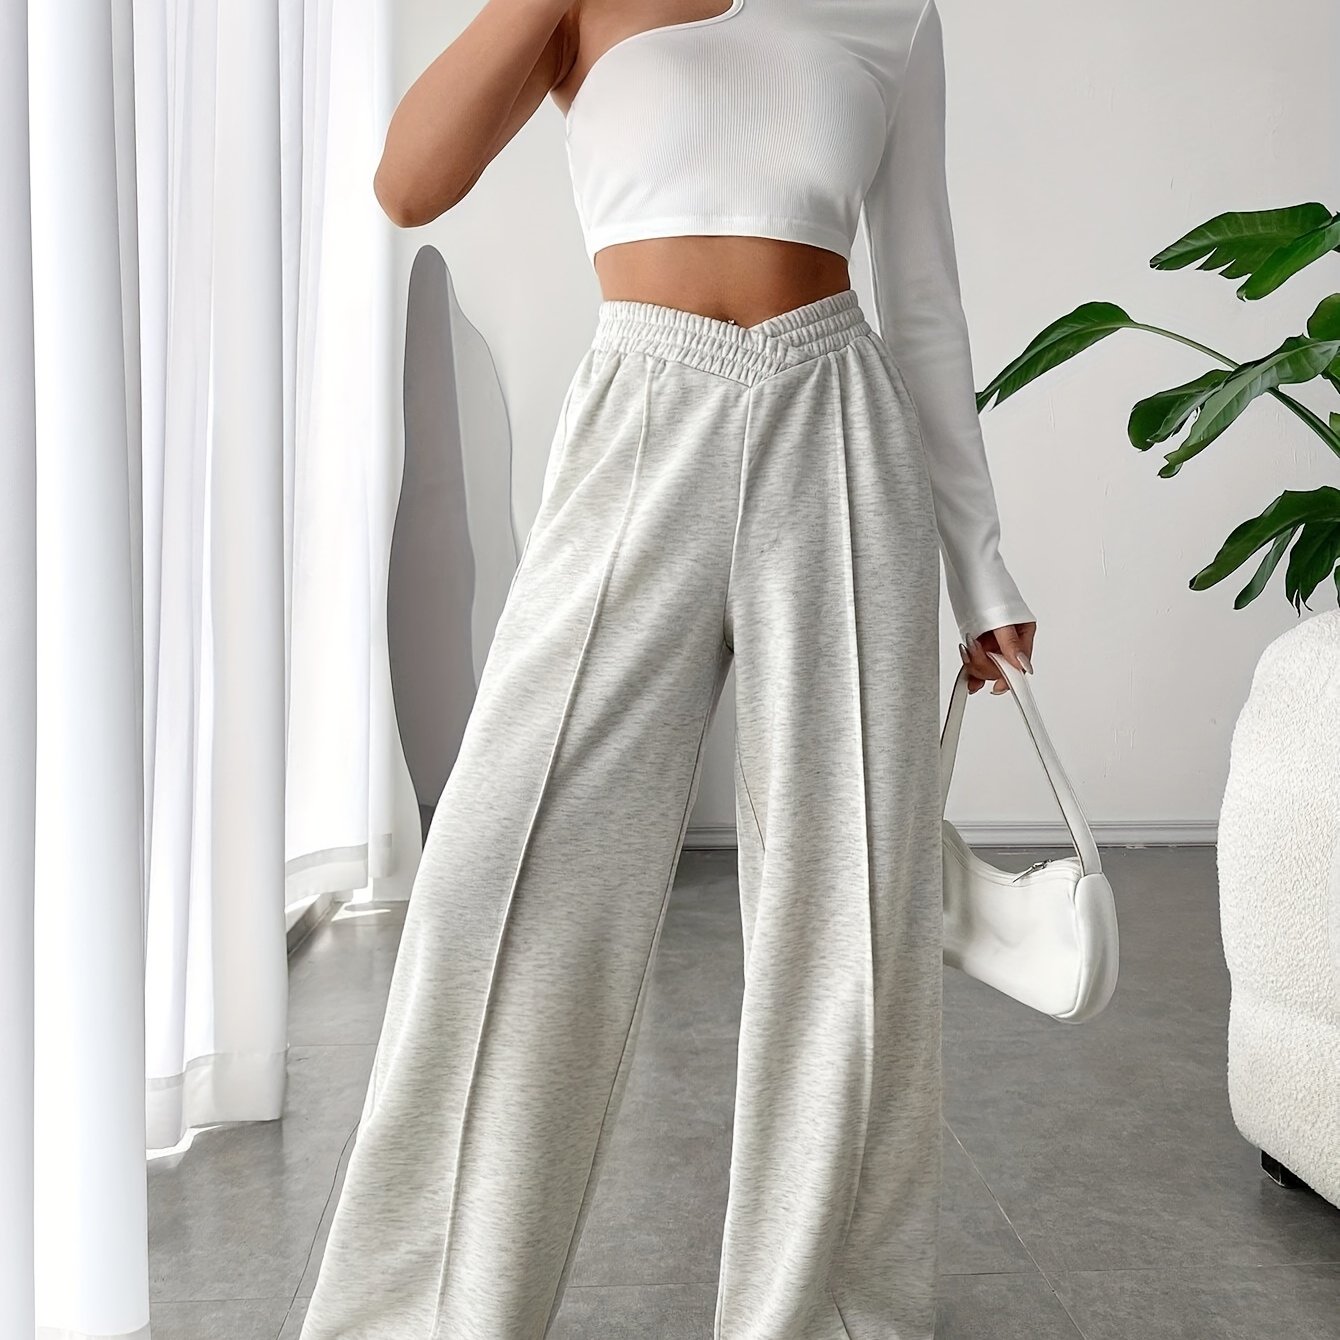 Crossover comfy wide leg pants for the win!🖤🩶 #crossoverpants #widel